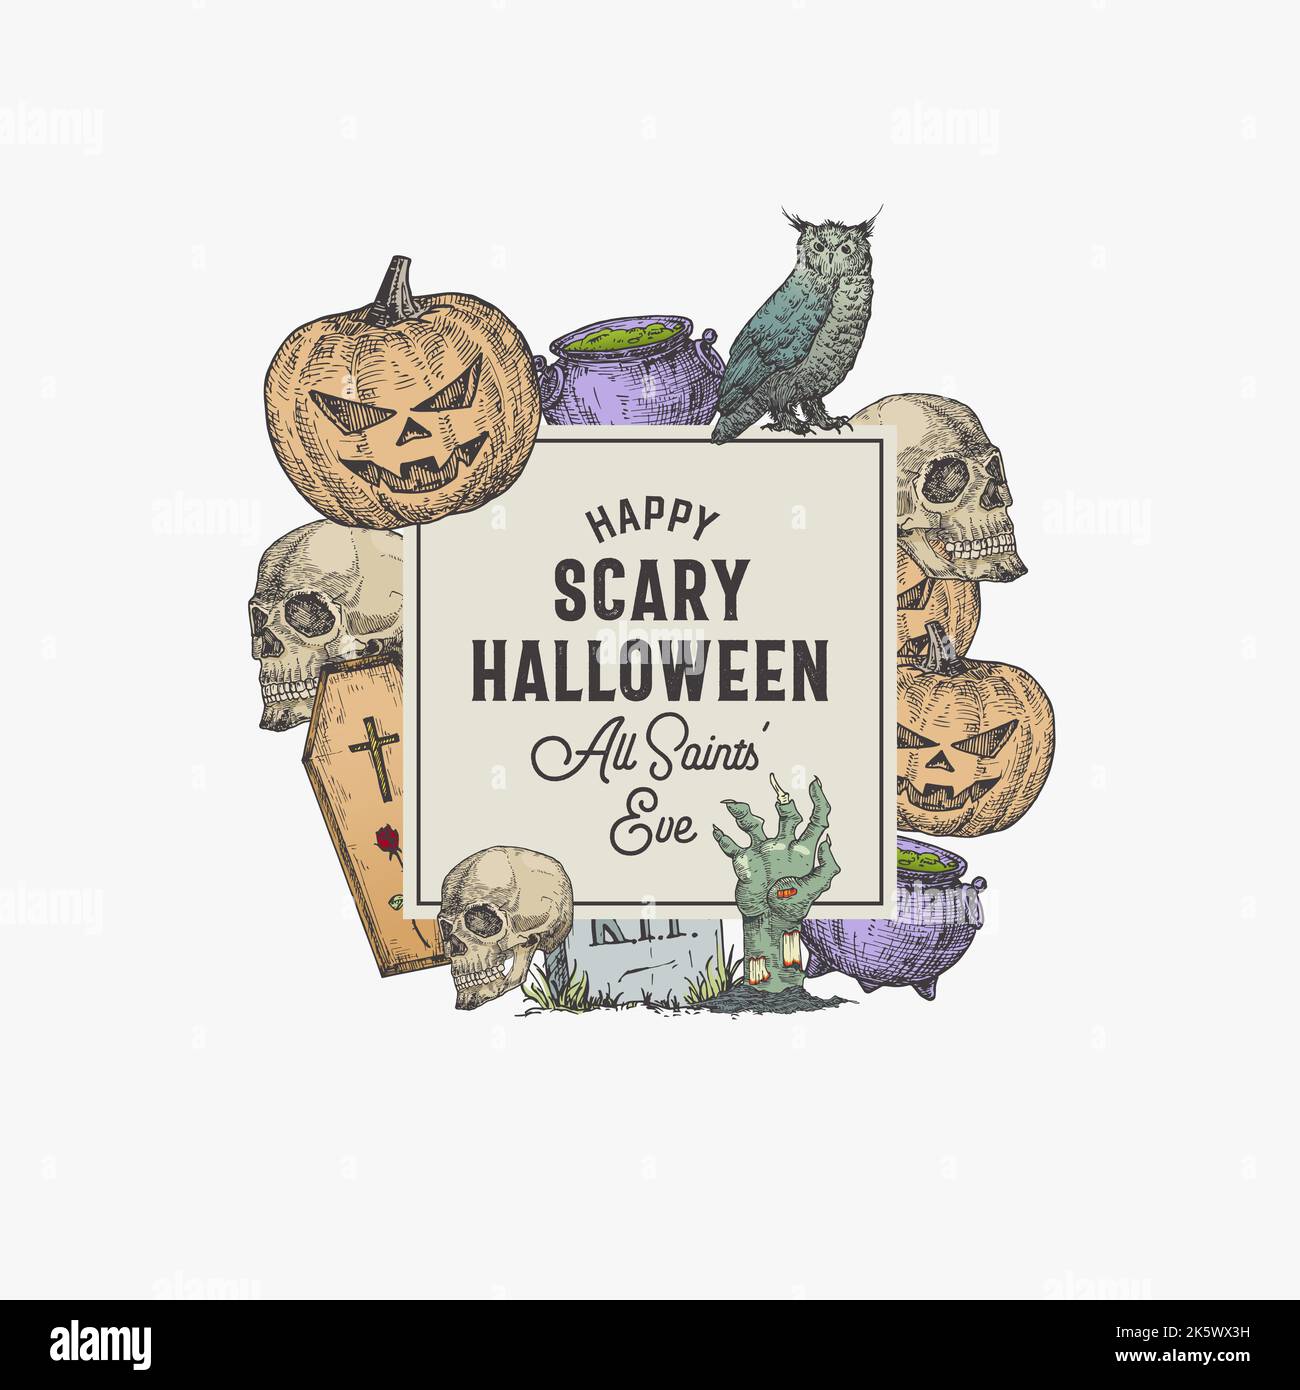 Vintage Style Halloween Square Frame Label Template. Hand Drawn Sculls, Evil Pumpkins, Owl, Tomb and Zombie Hand Sketch Illustrations with Retro Stock Vector